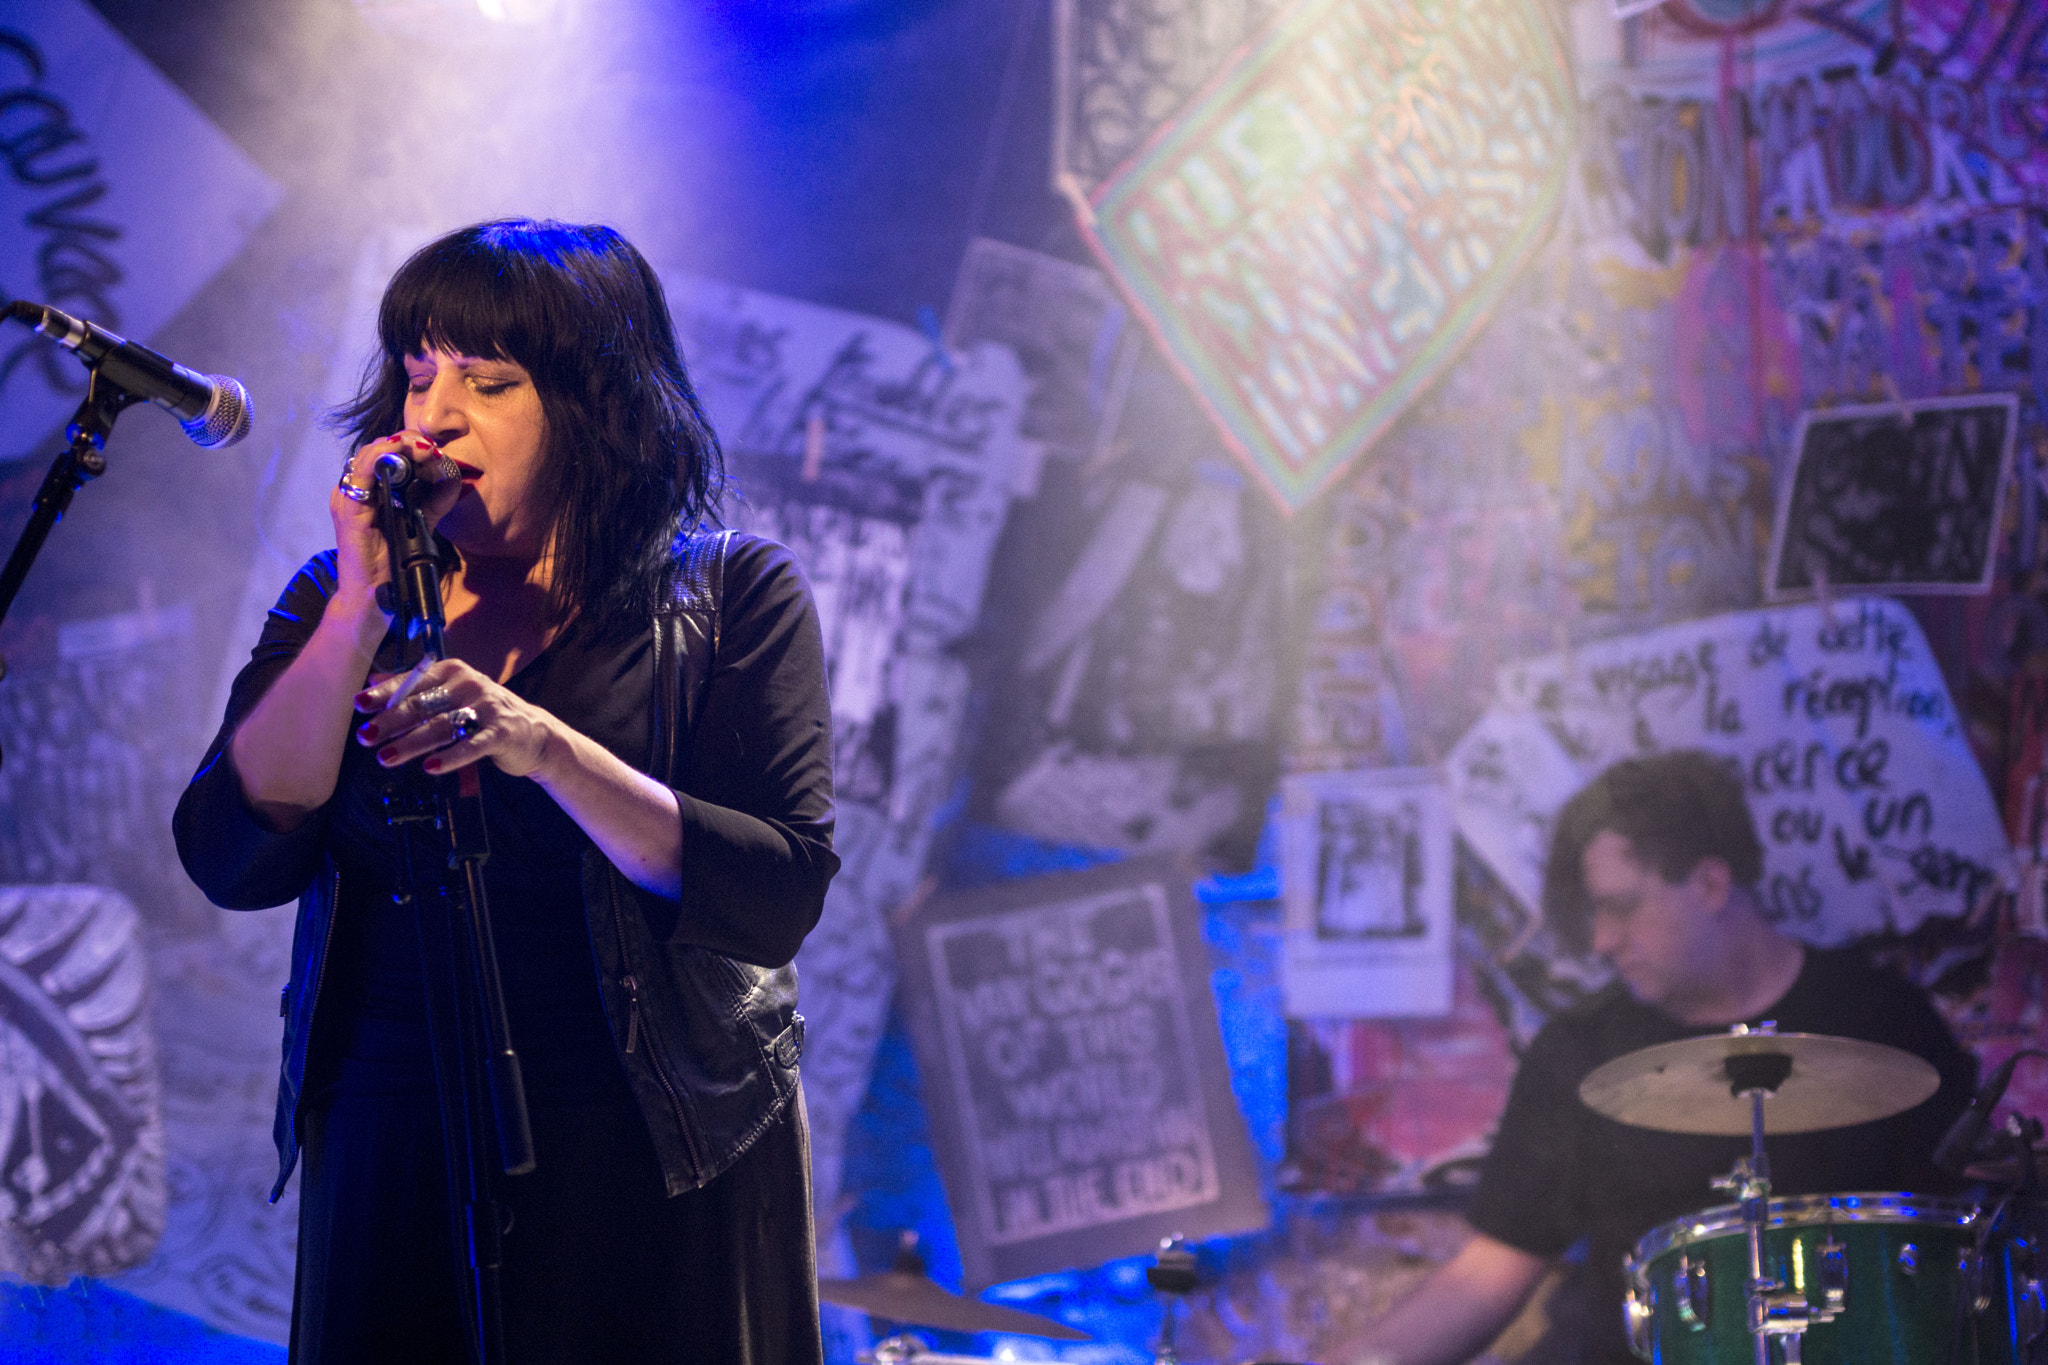 Sony SLT-A77 sample photo. Lydia lunch and weasel walter photography